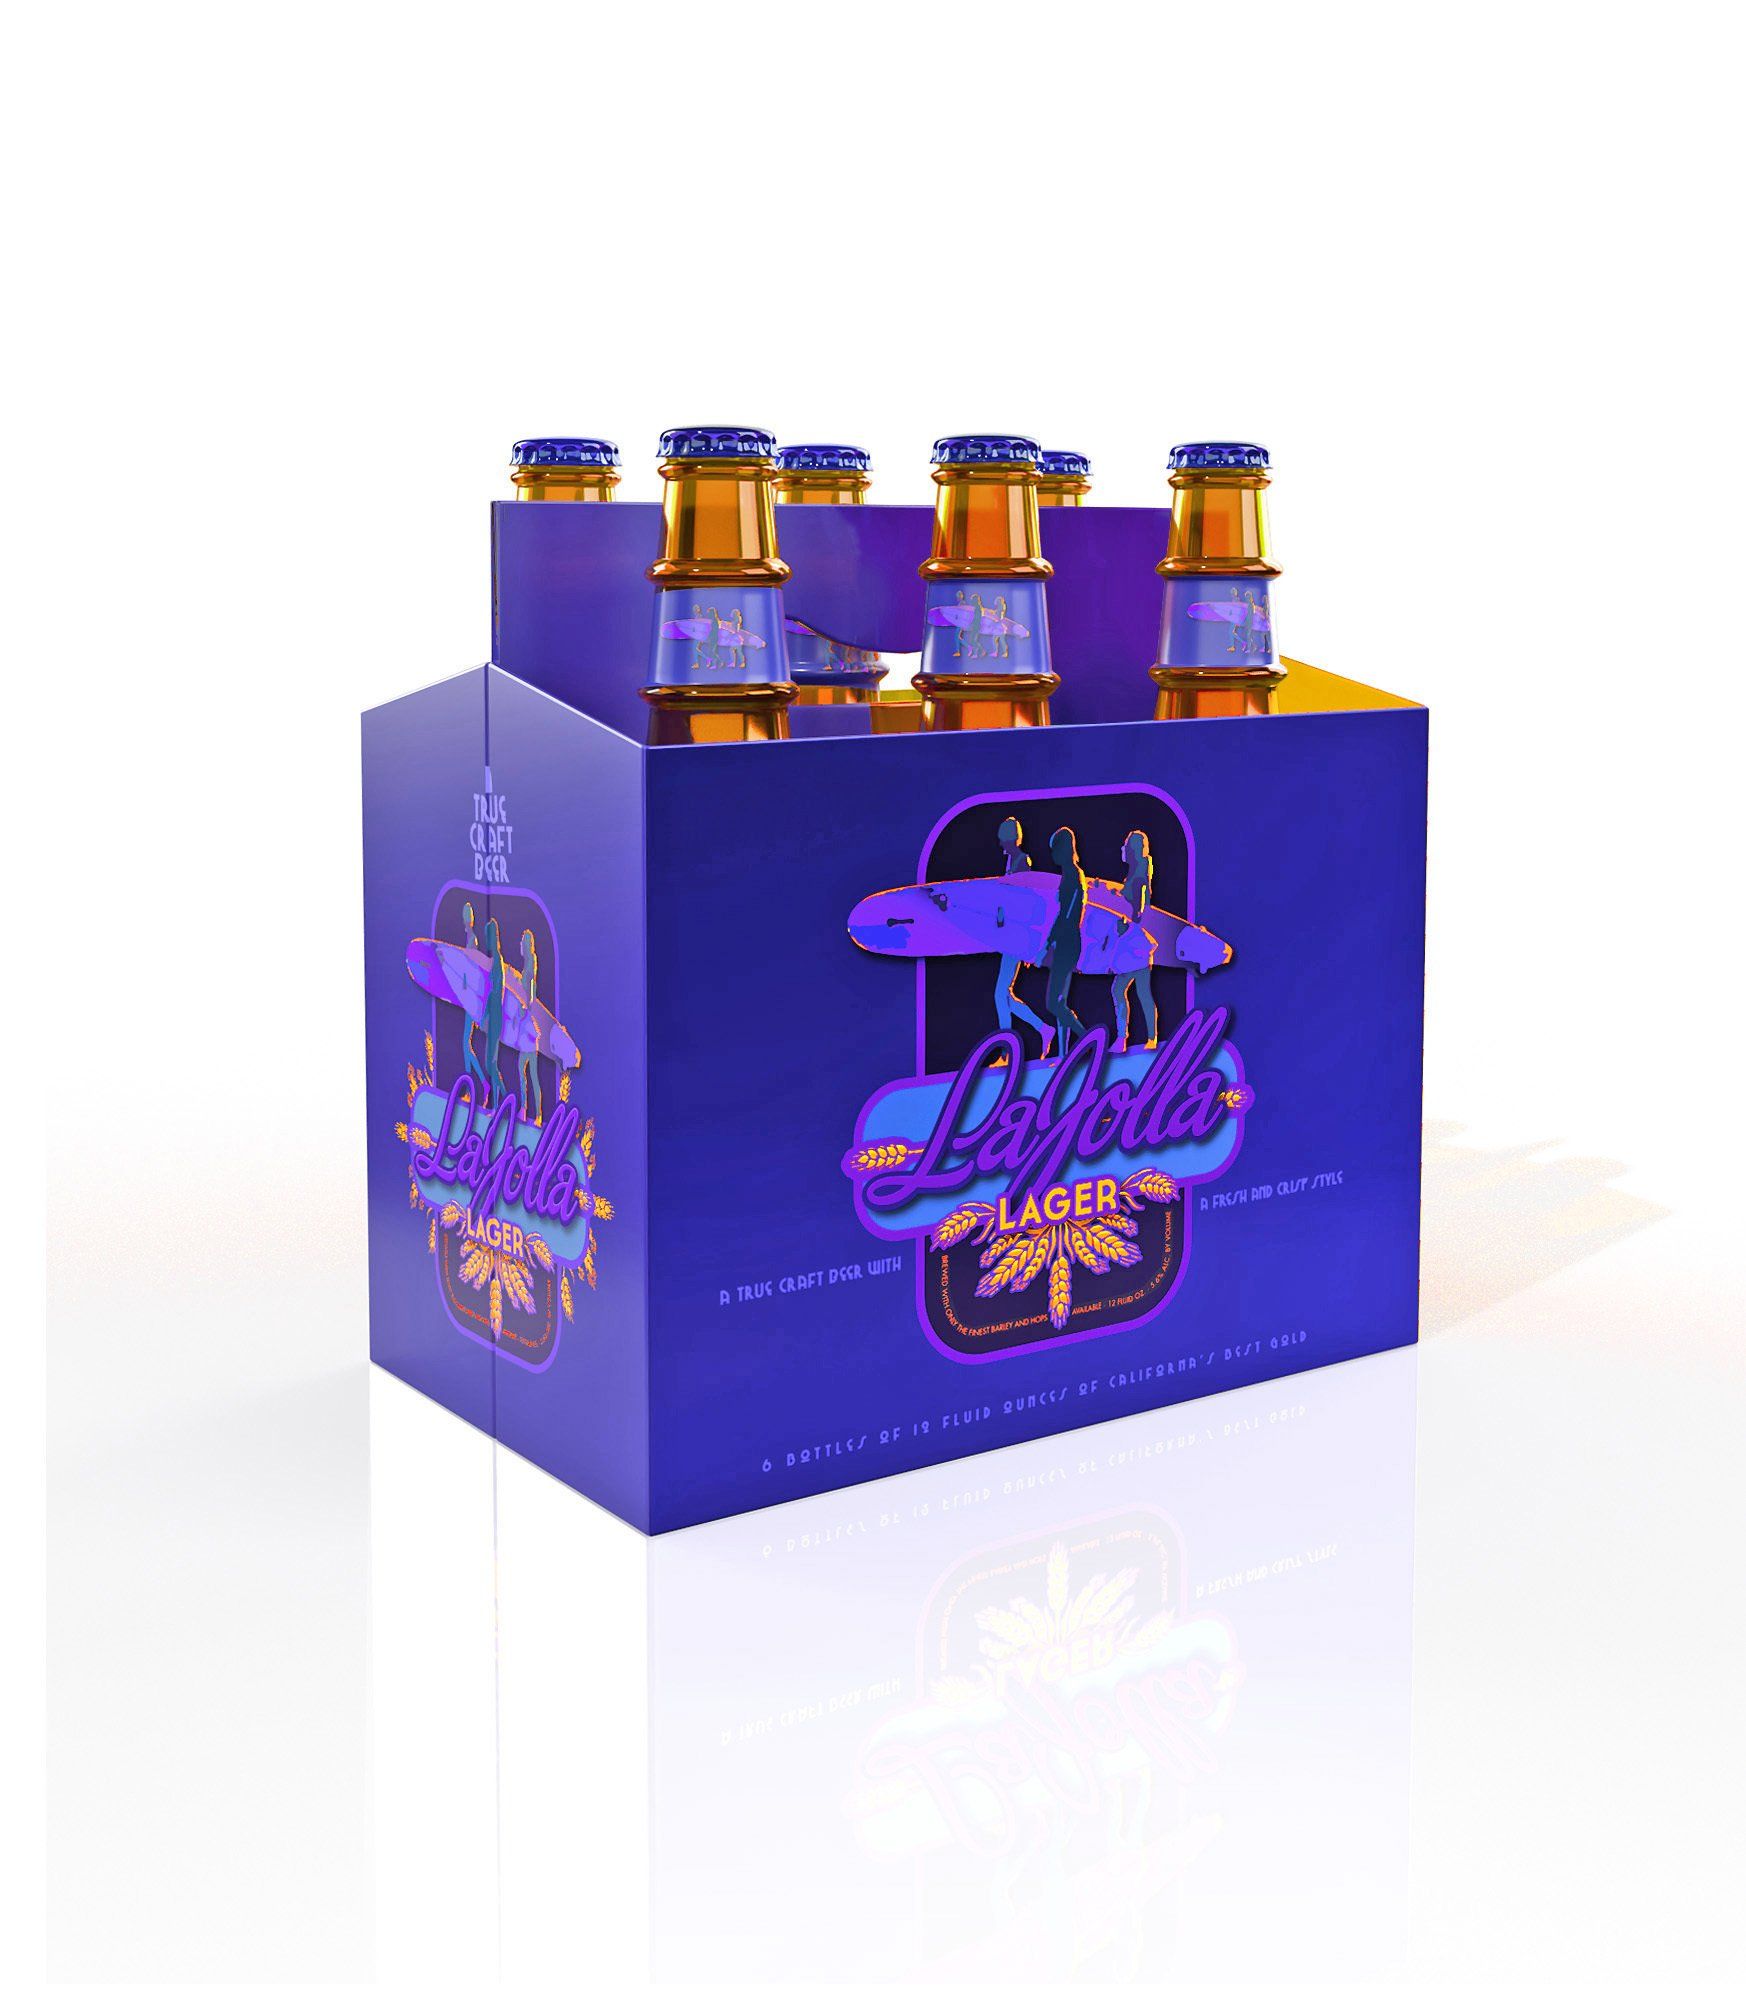 packaging for a six-pack of beer bottles